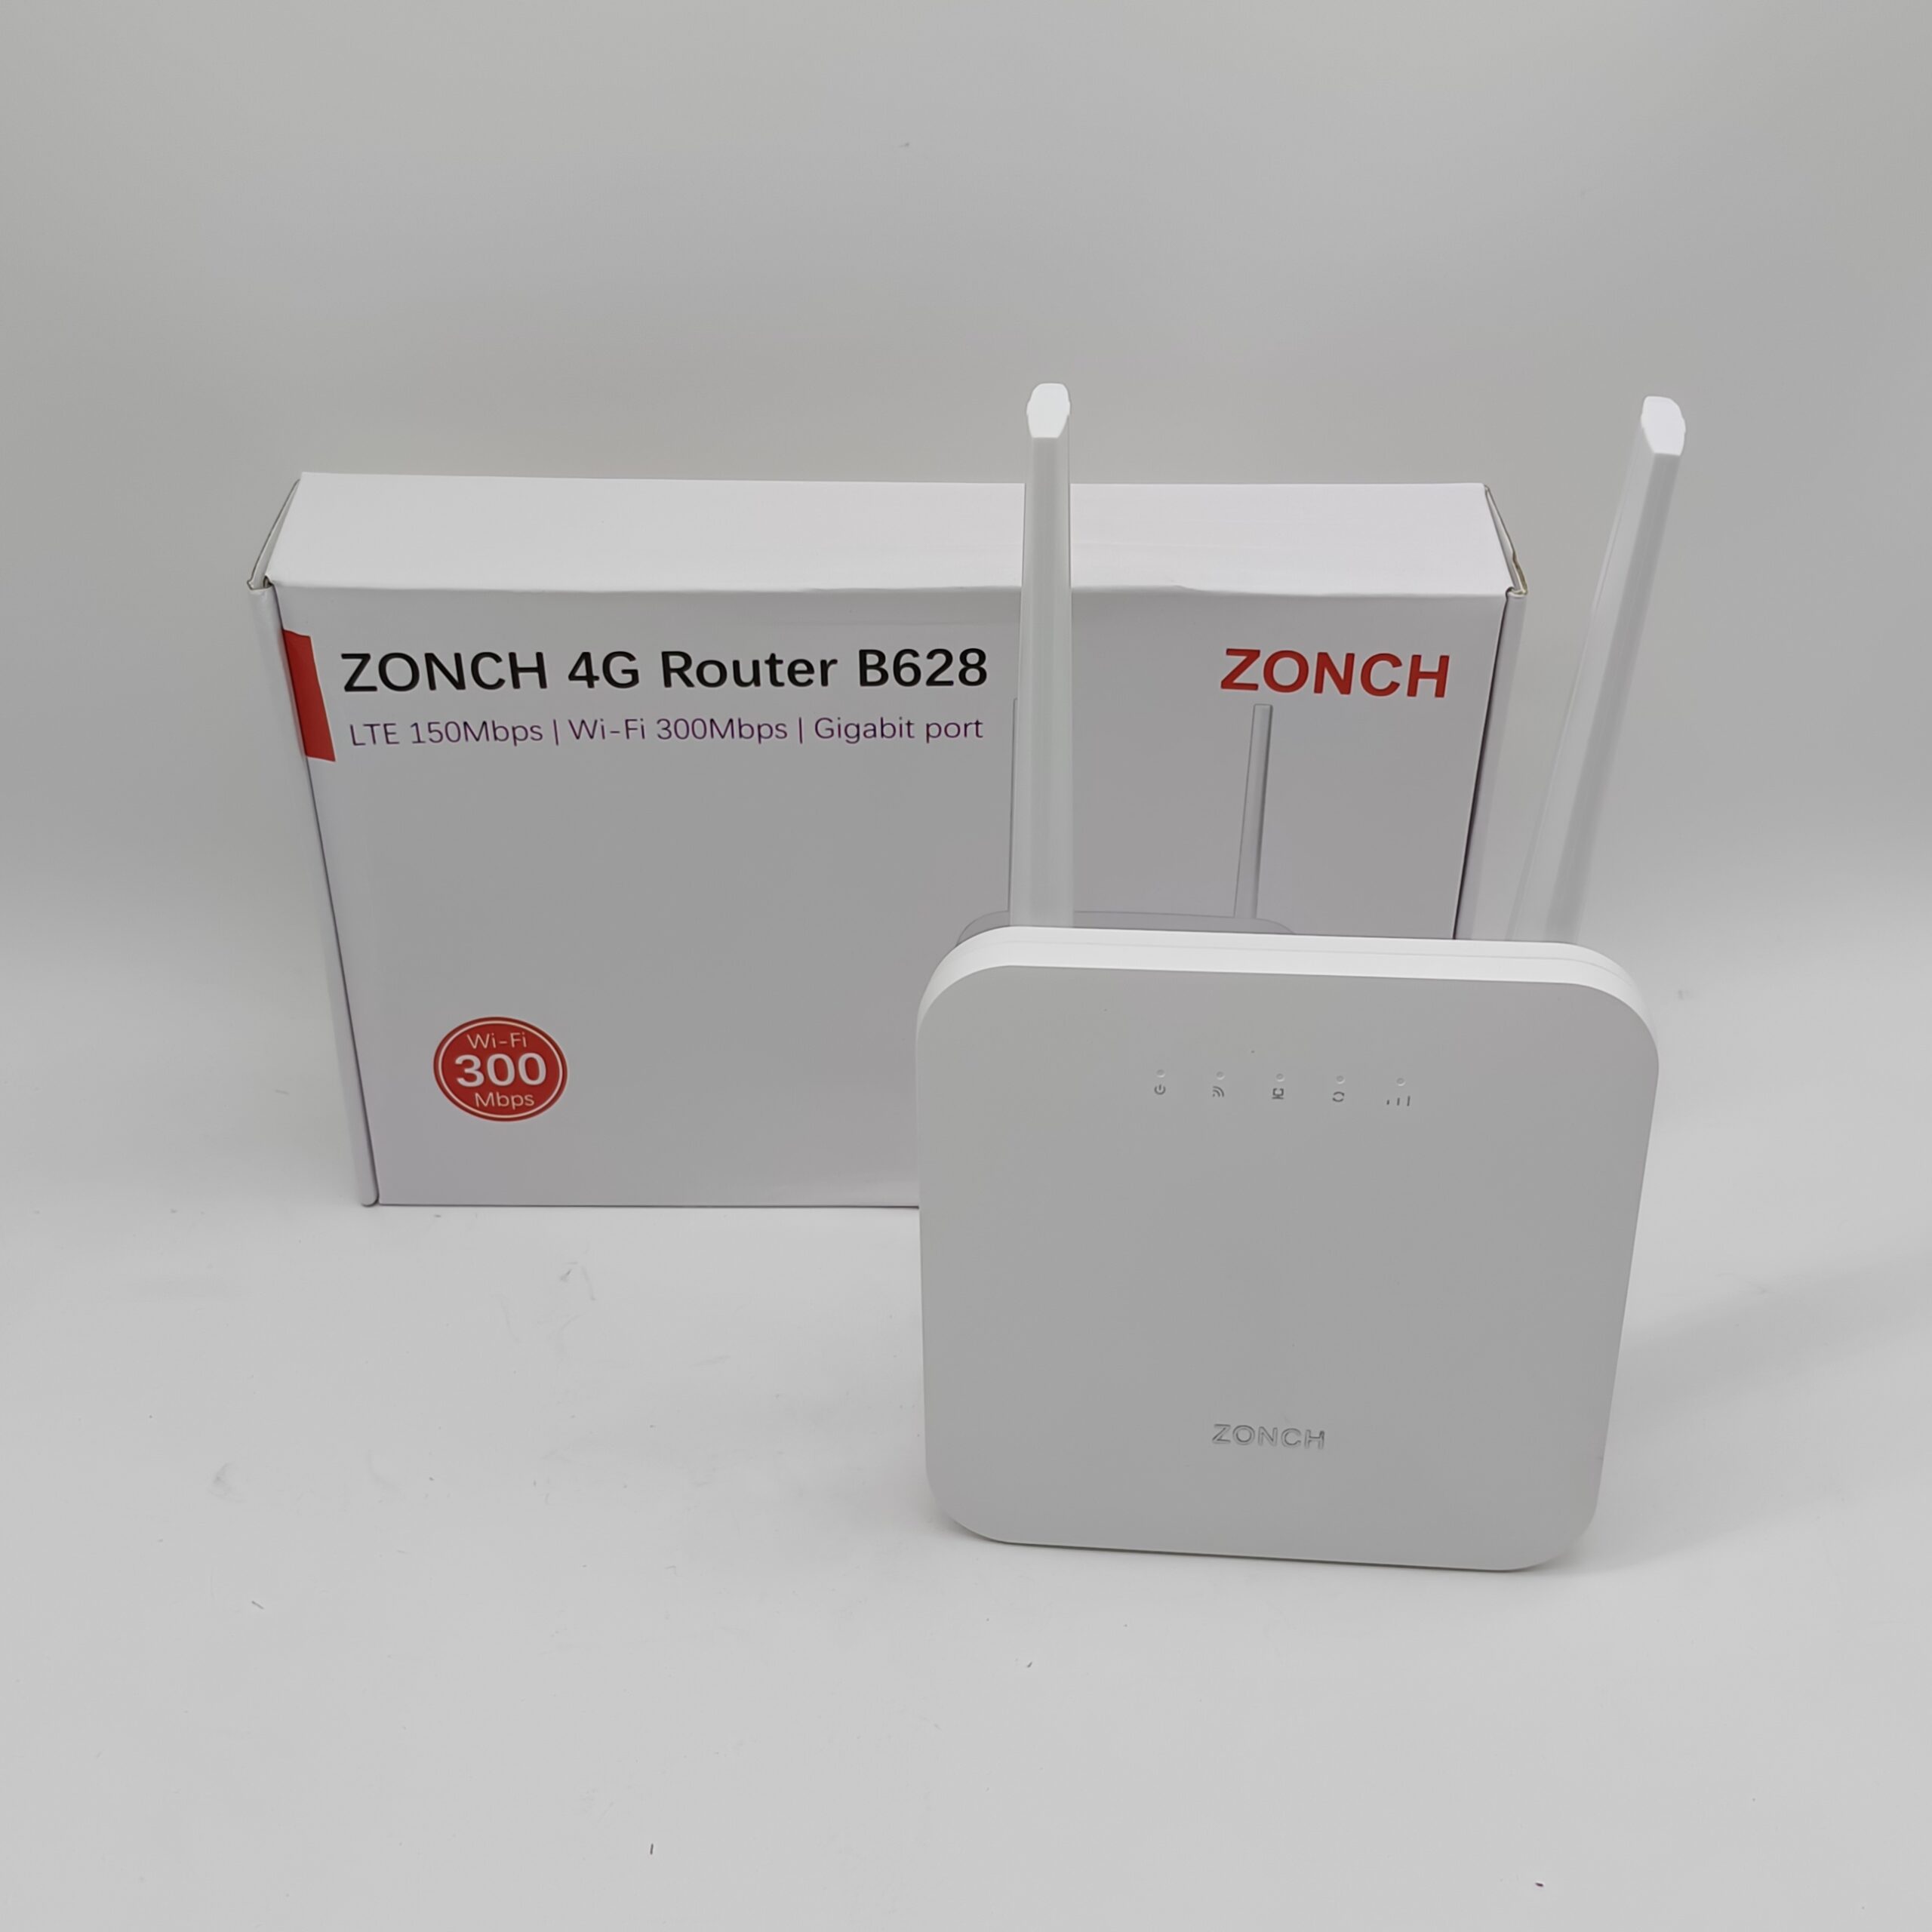 Zonch 4G Router B628